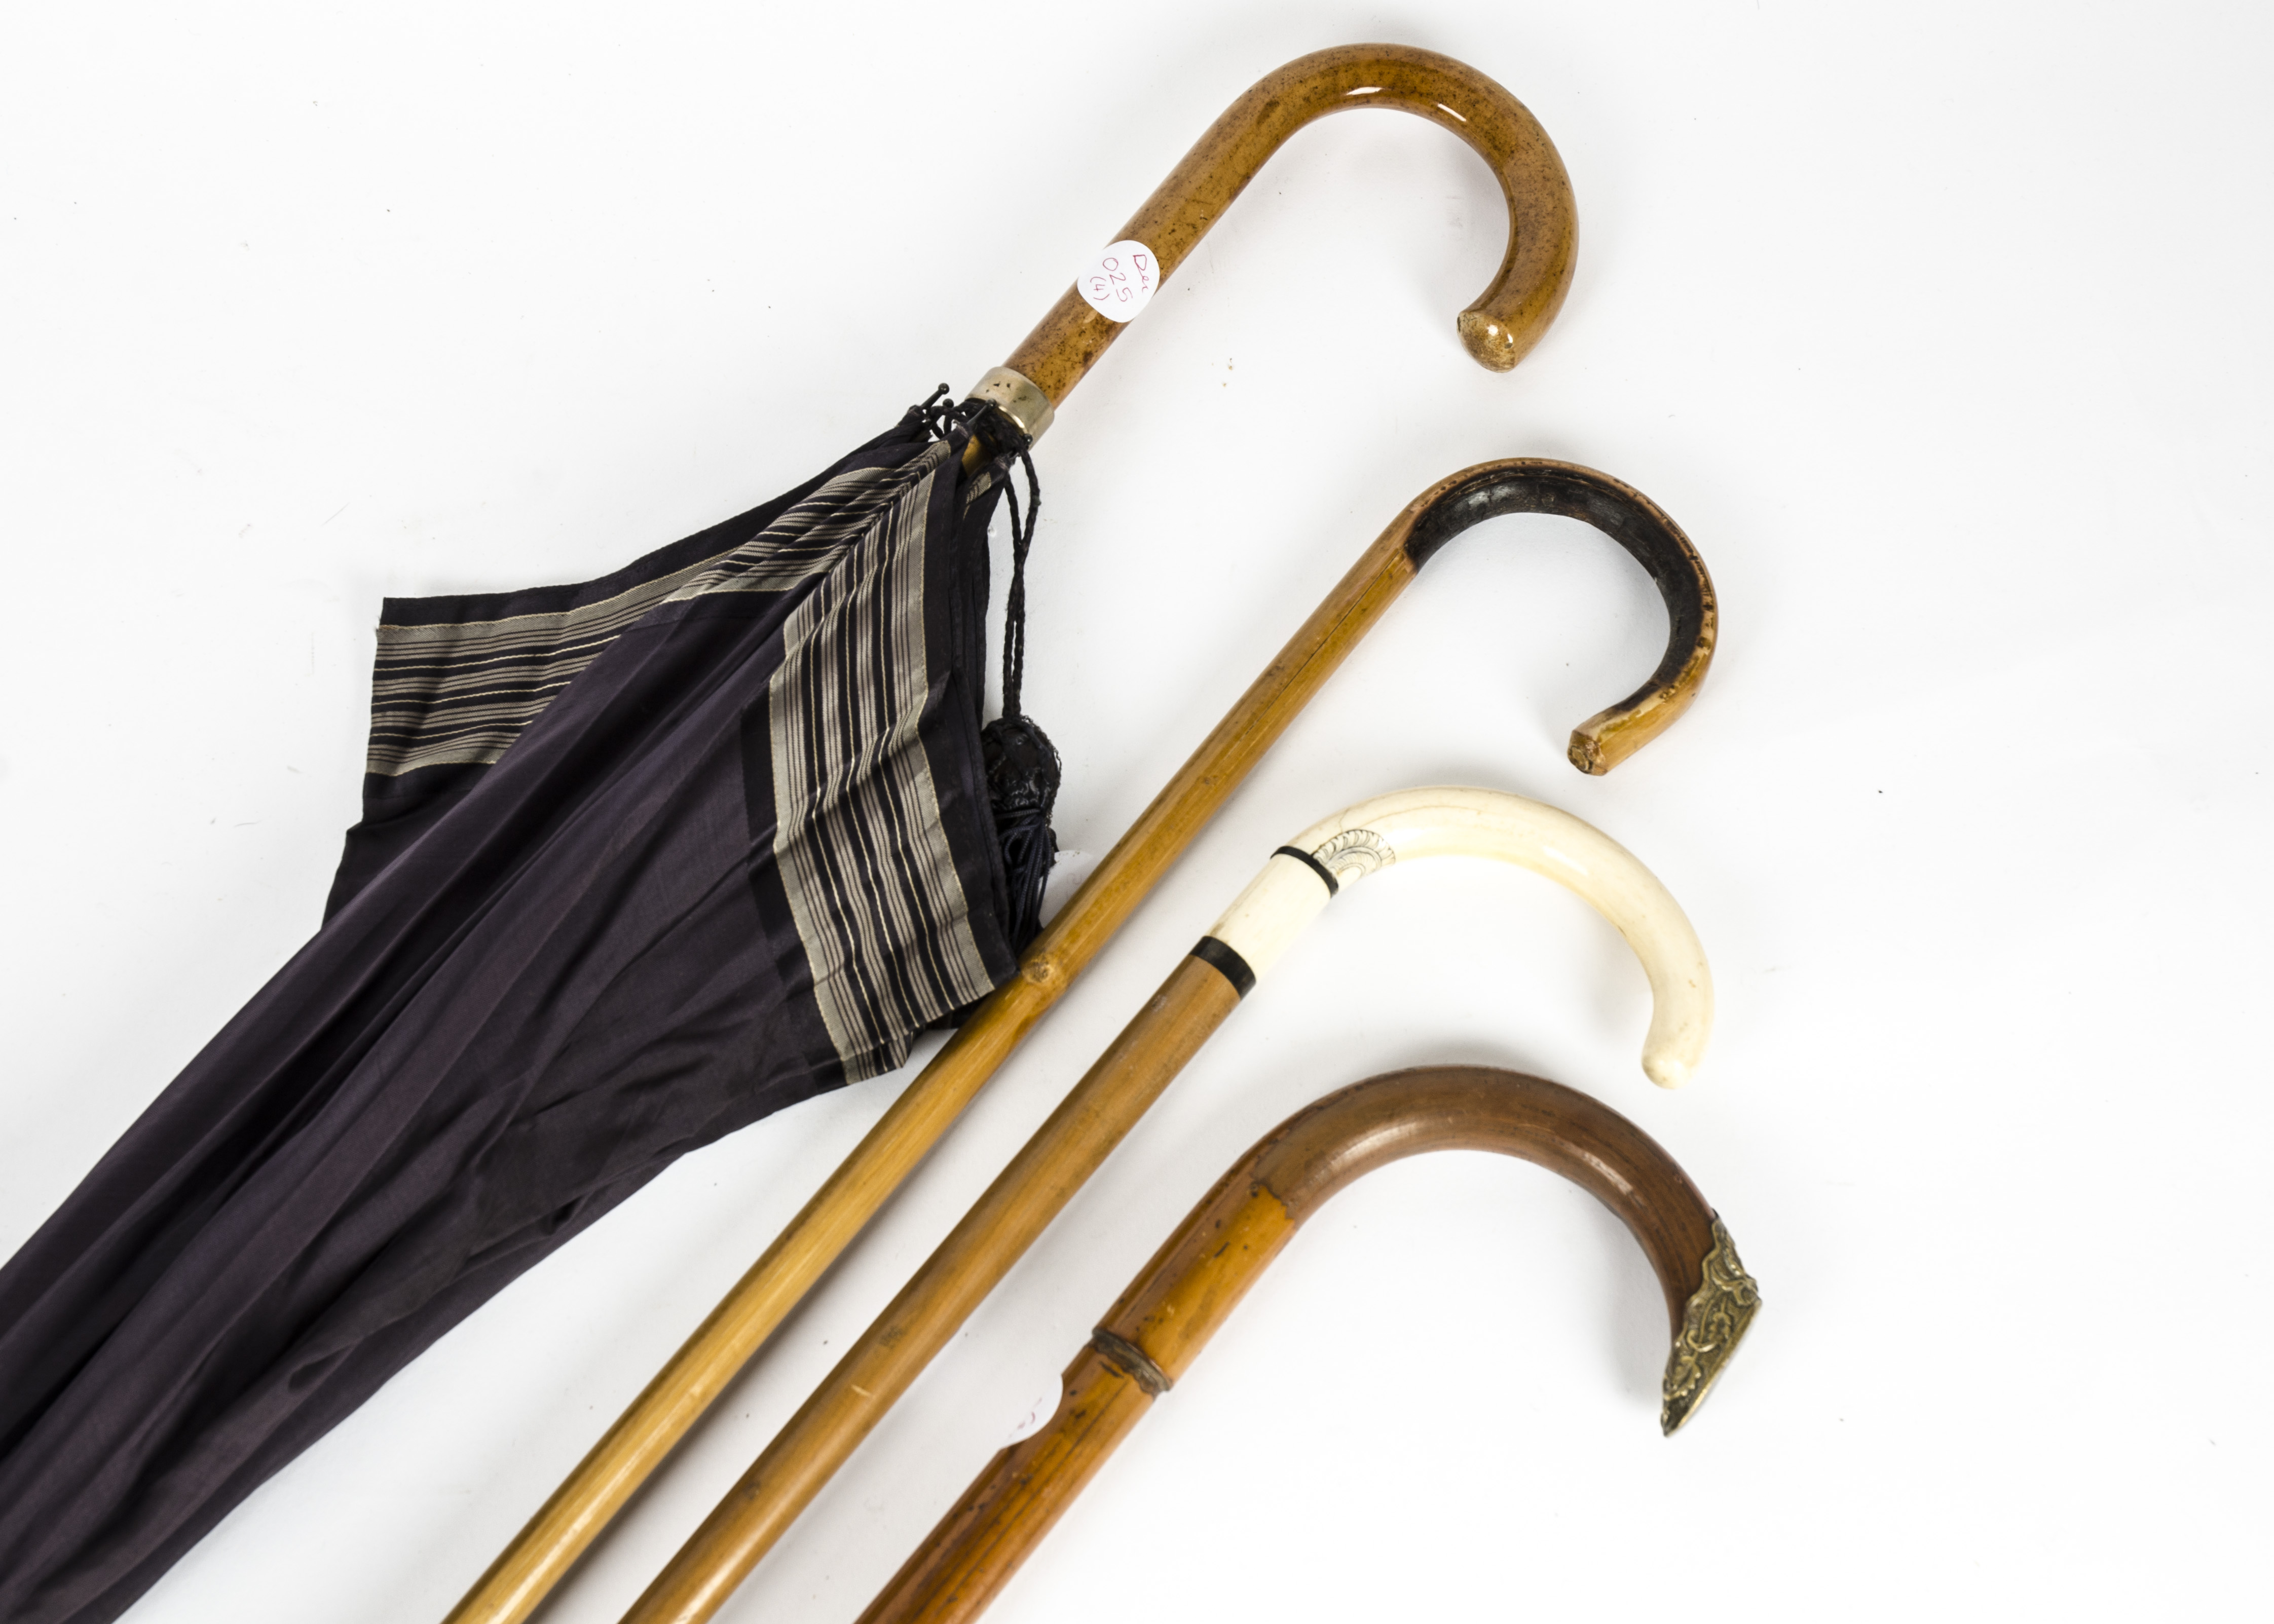 Three 20th Century wooden walking sticks, one with a bone handle, together with a black umbrella